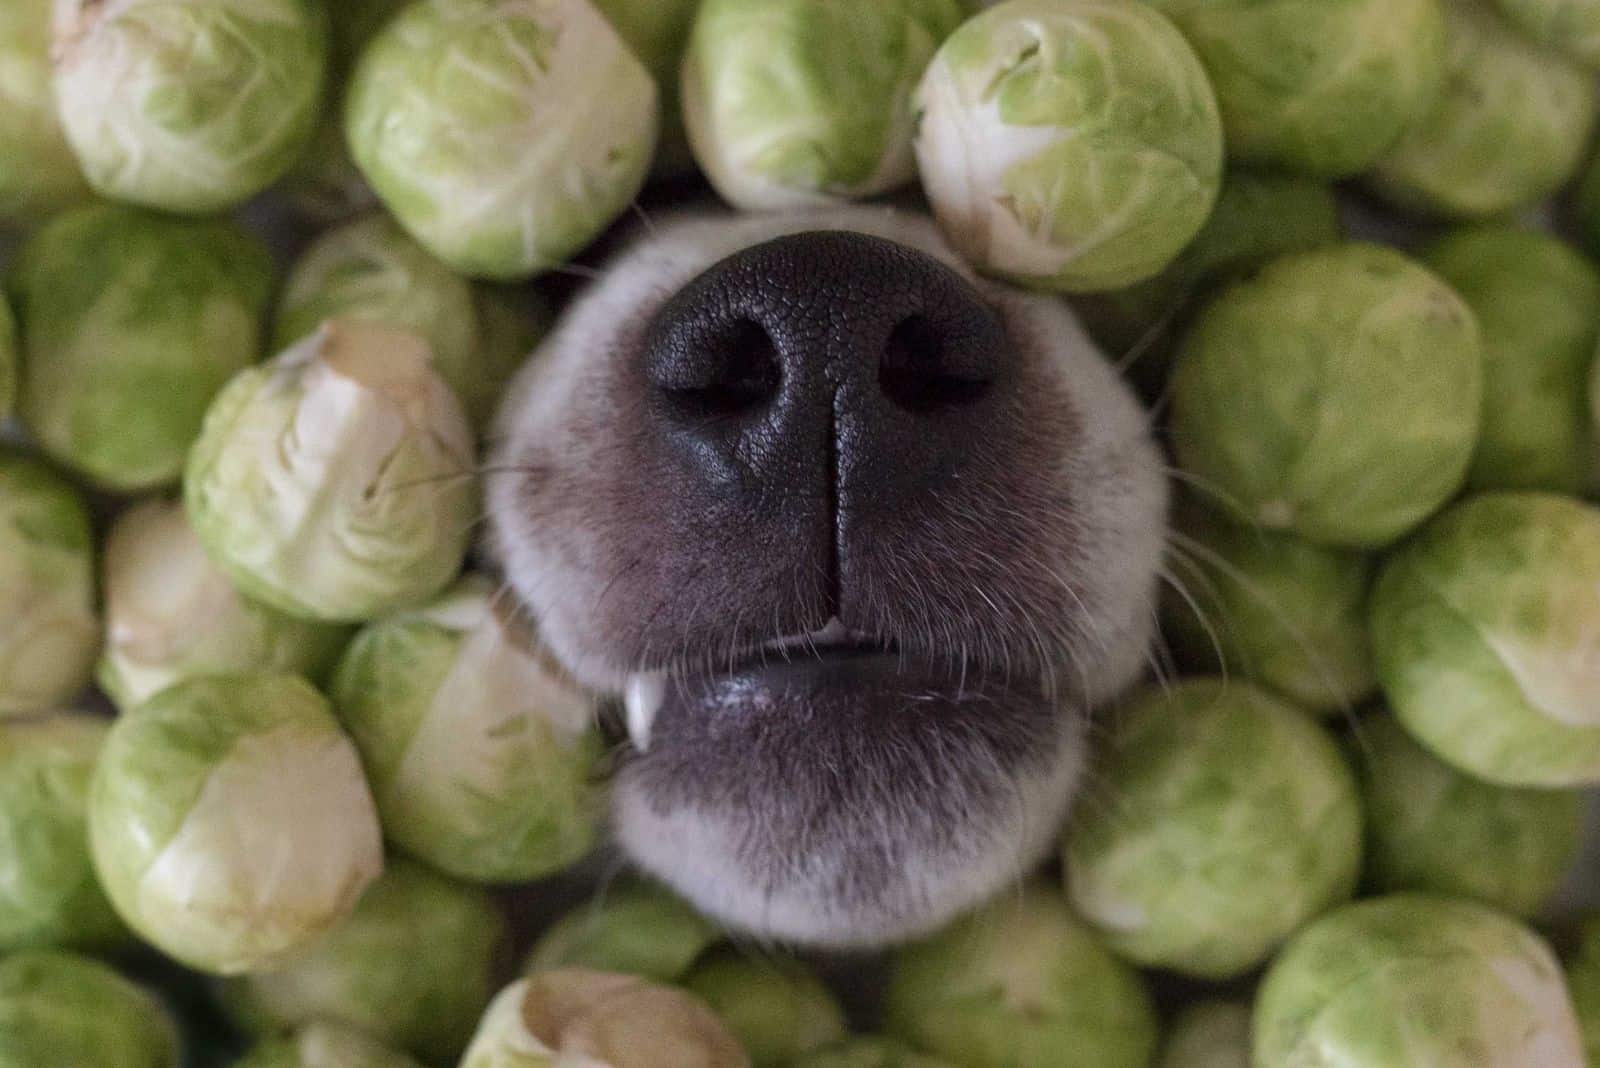 dog's nose poking out of the brussel sprouts